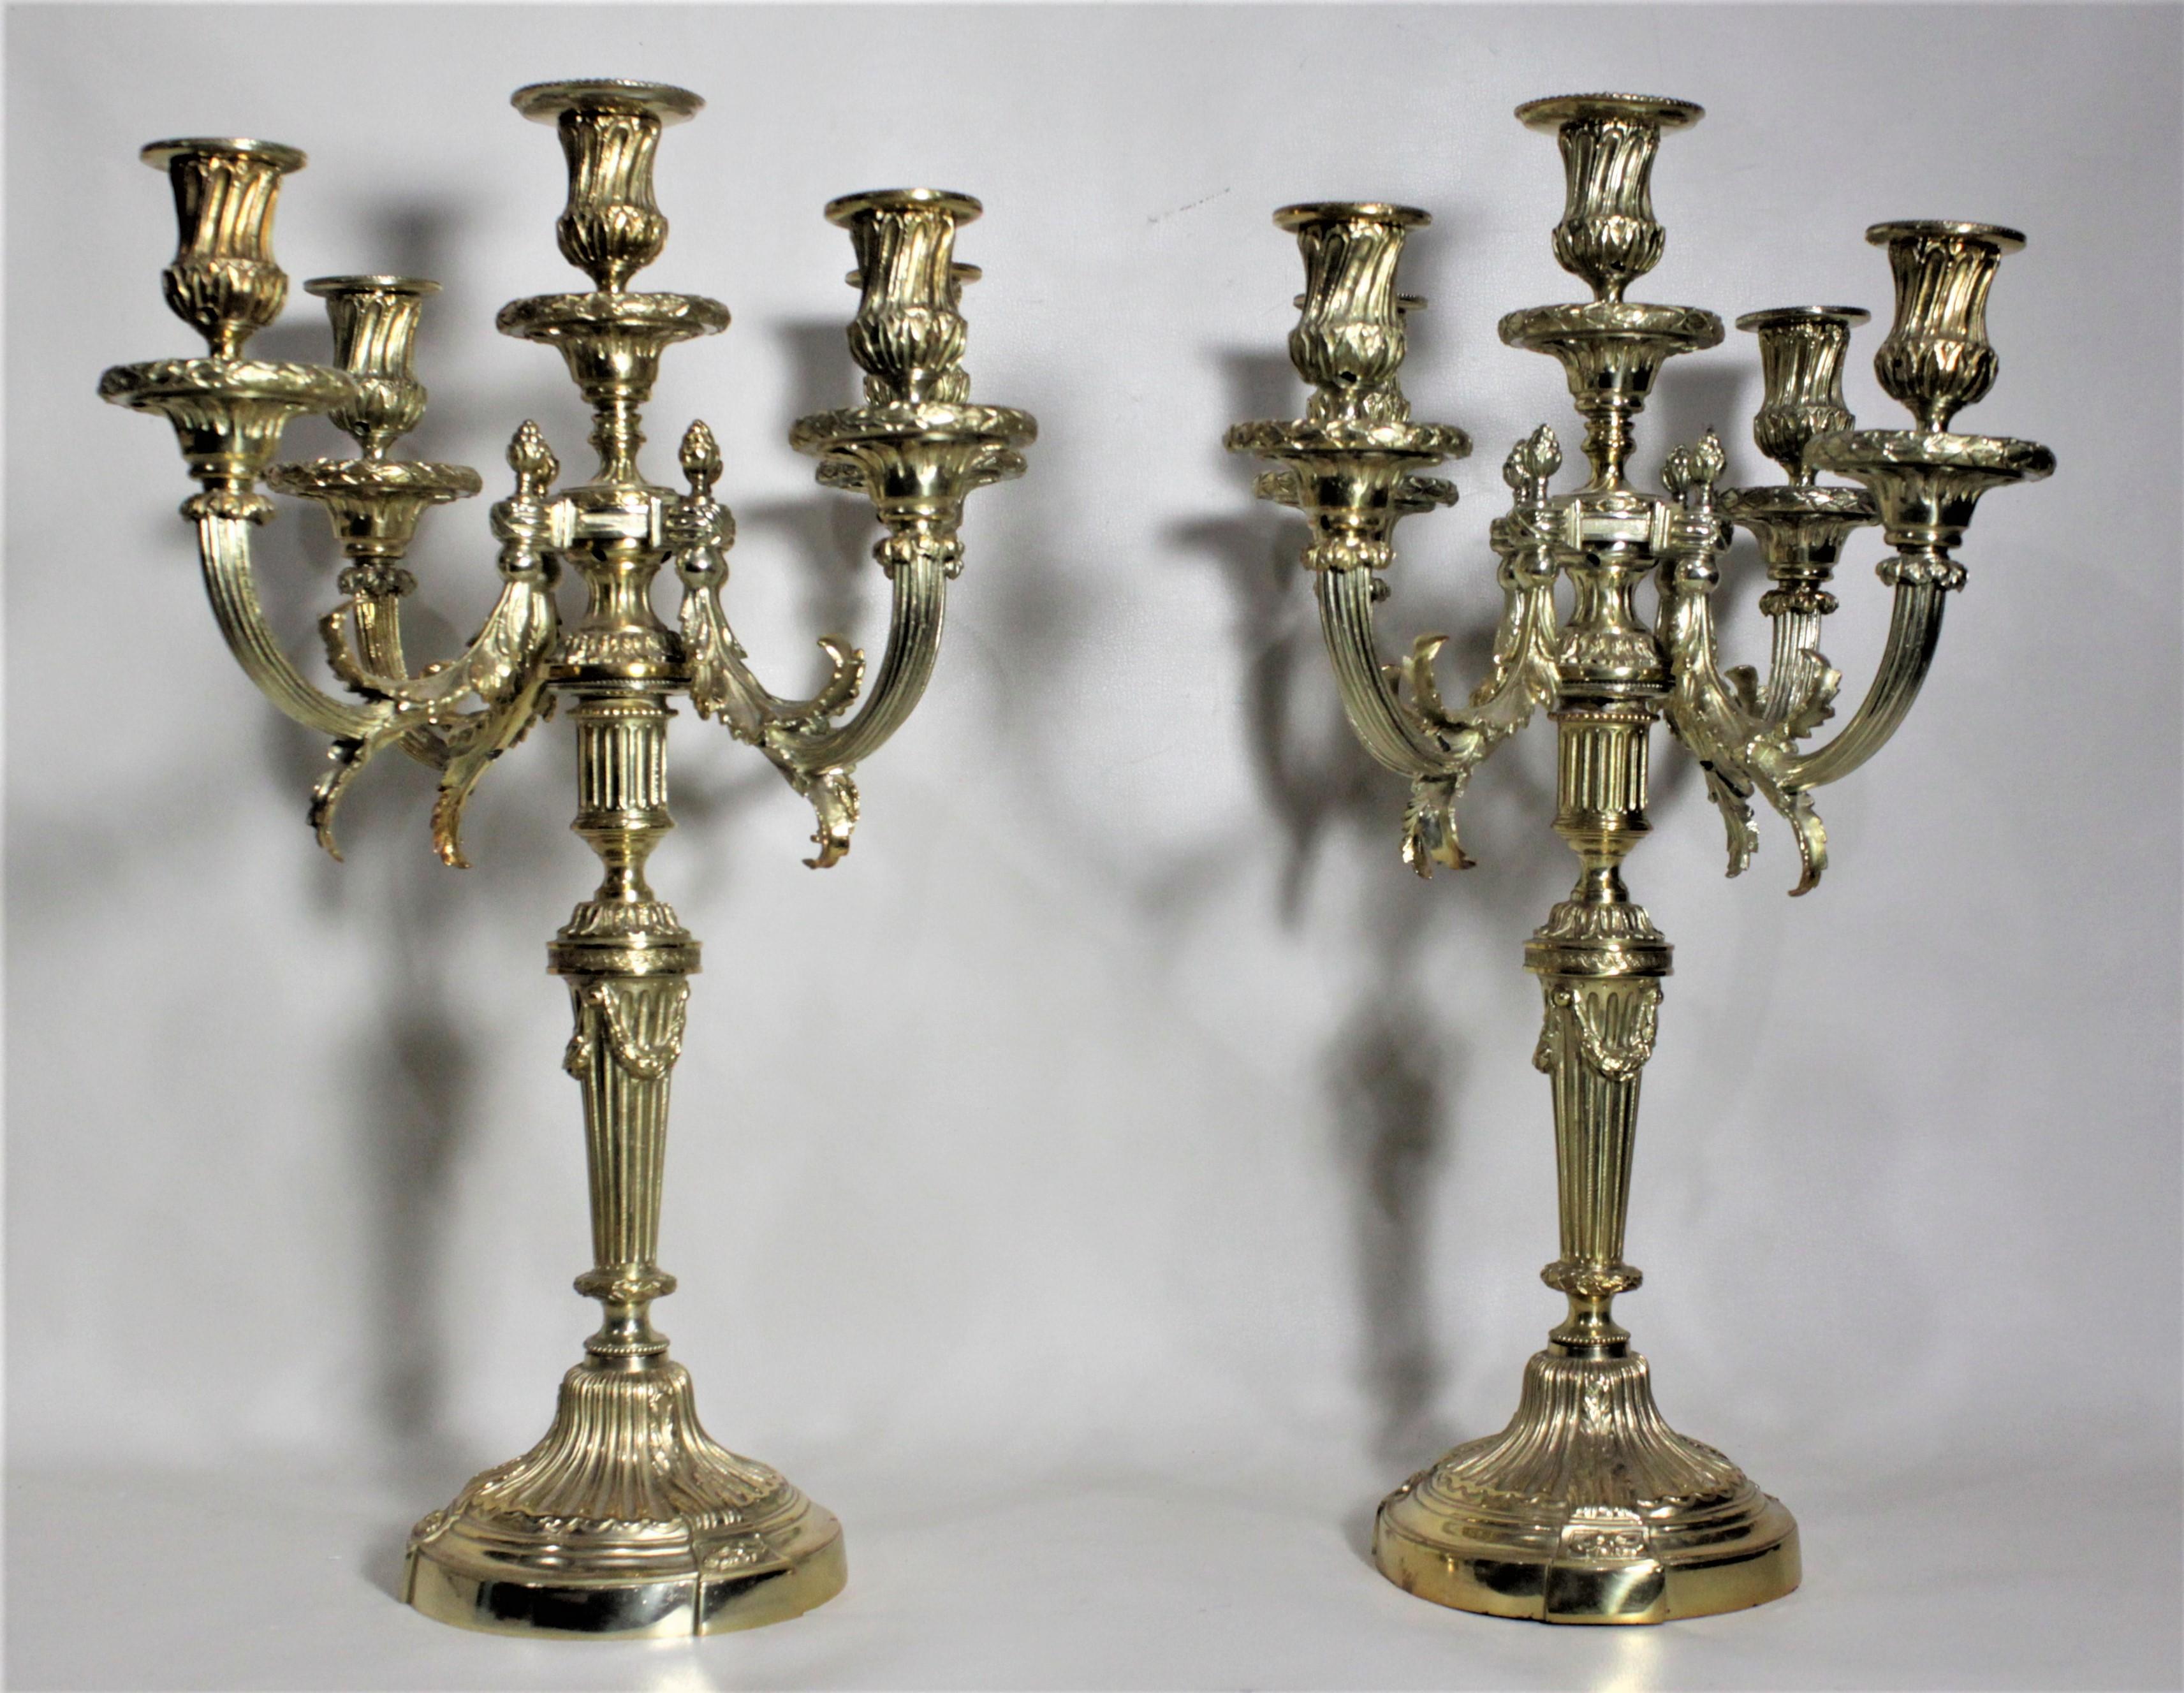 This pair of antique gilt candelabras are unmarked, but presumed to have been made in France between 1900 and 1920 in the Empire style. The candelabras are very ornately cast with scrolling leaves accenting each cup, and pineapple finials which